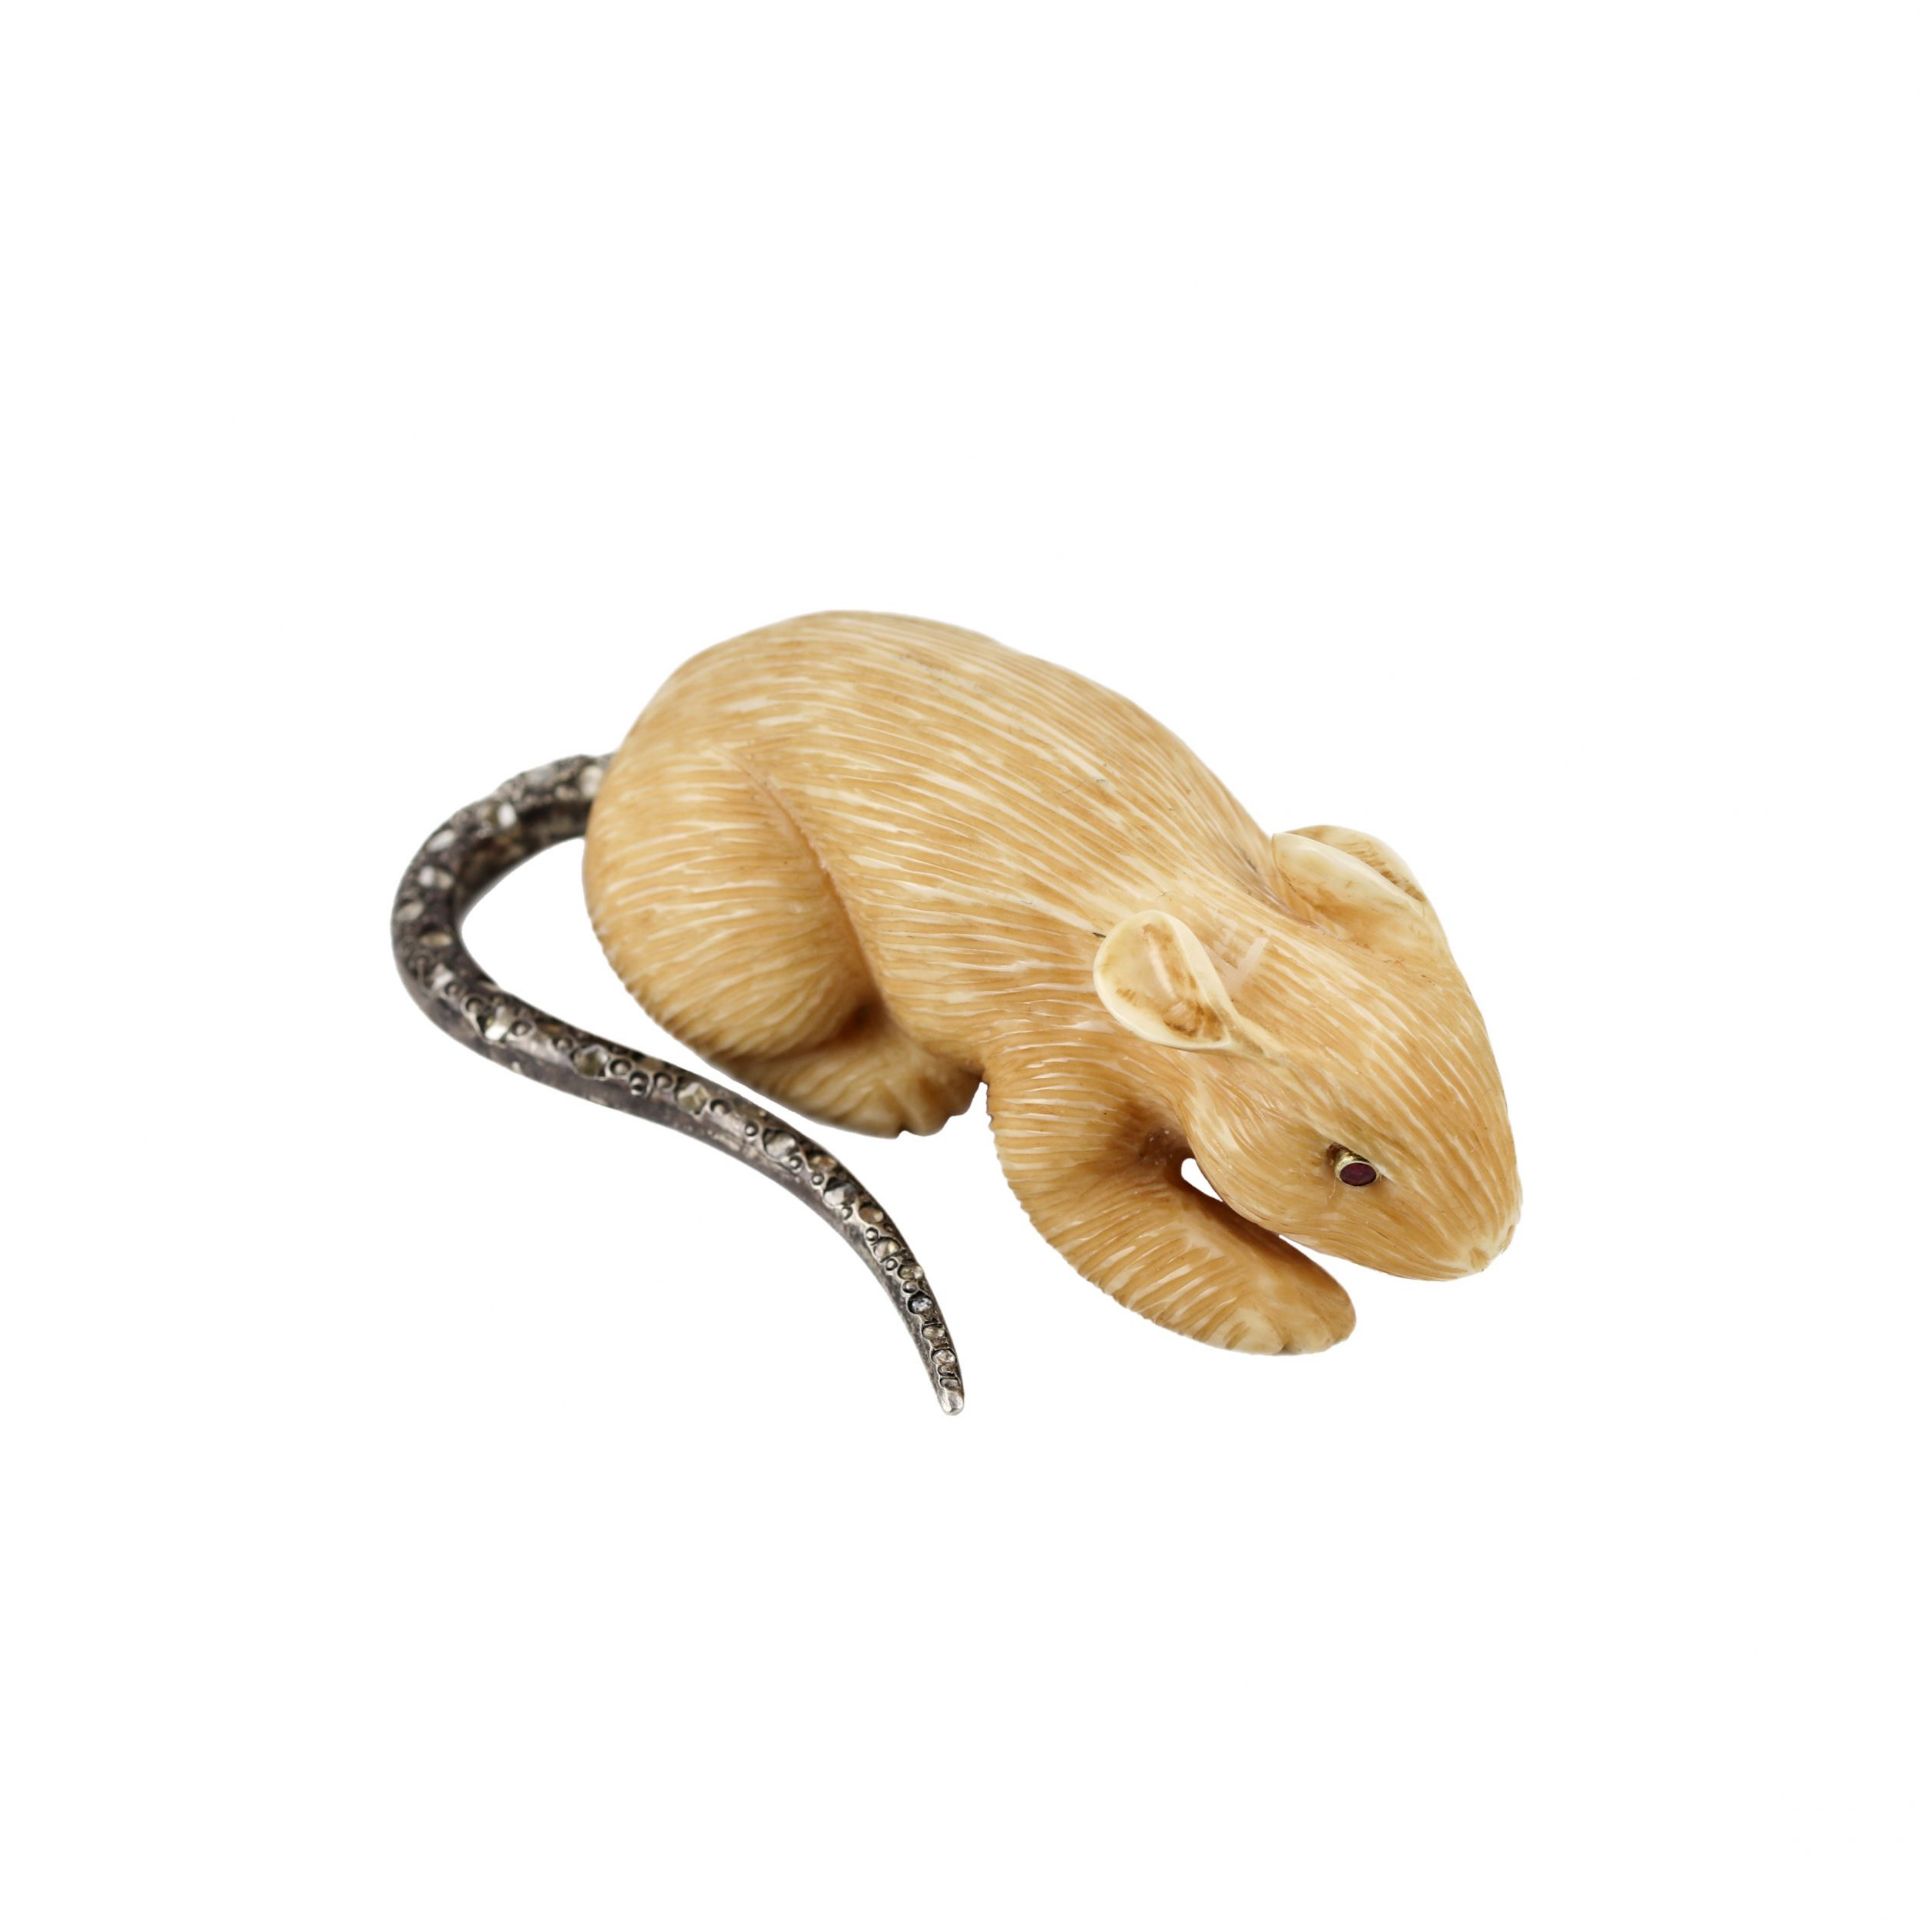 Carved mammoth tusk mouse with diamond tail. - Image 5 of 9